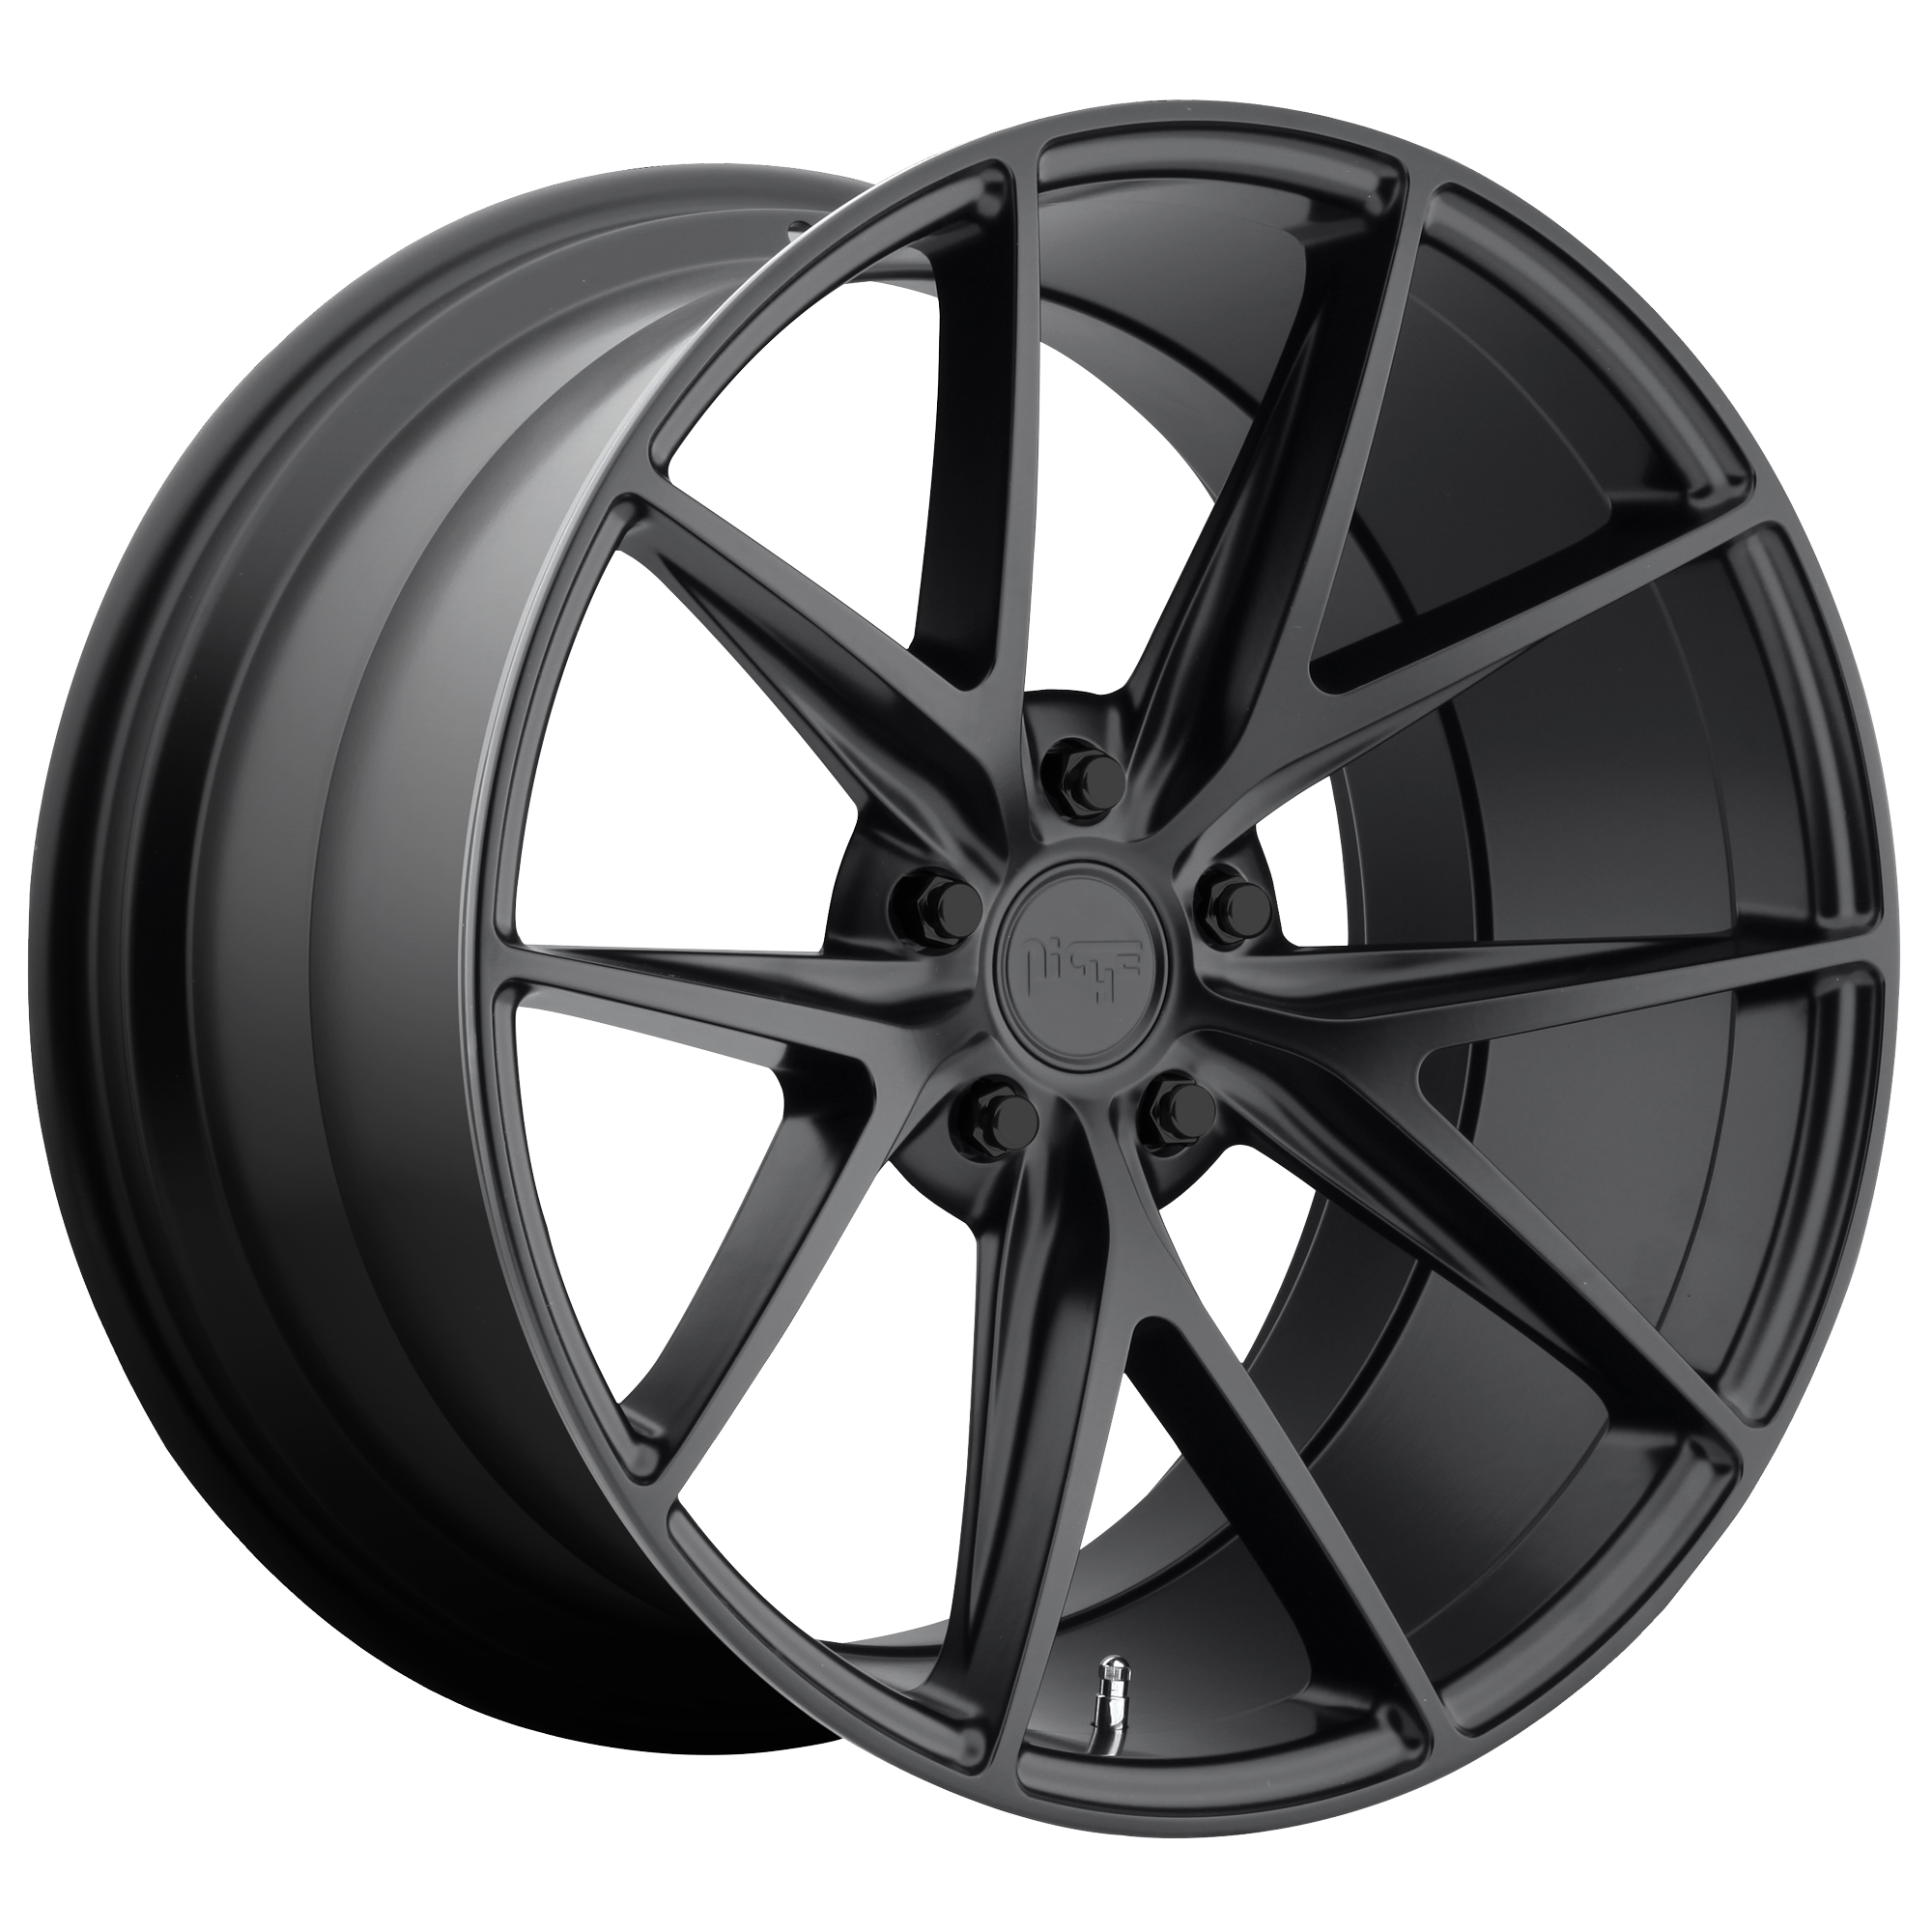 MISANO 20x10.5 5x115.00 MATTE BLACK (20 mm) - Tires and Engine Performance